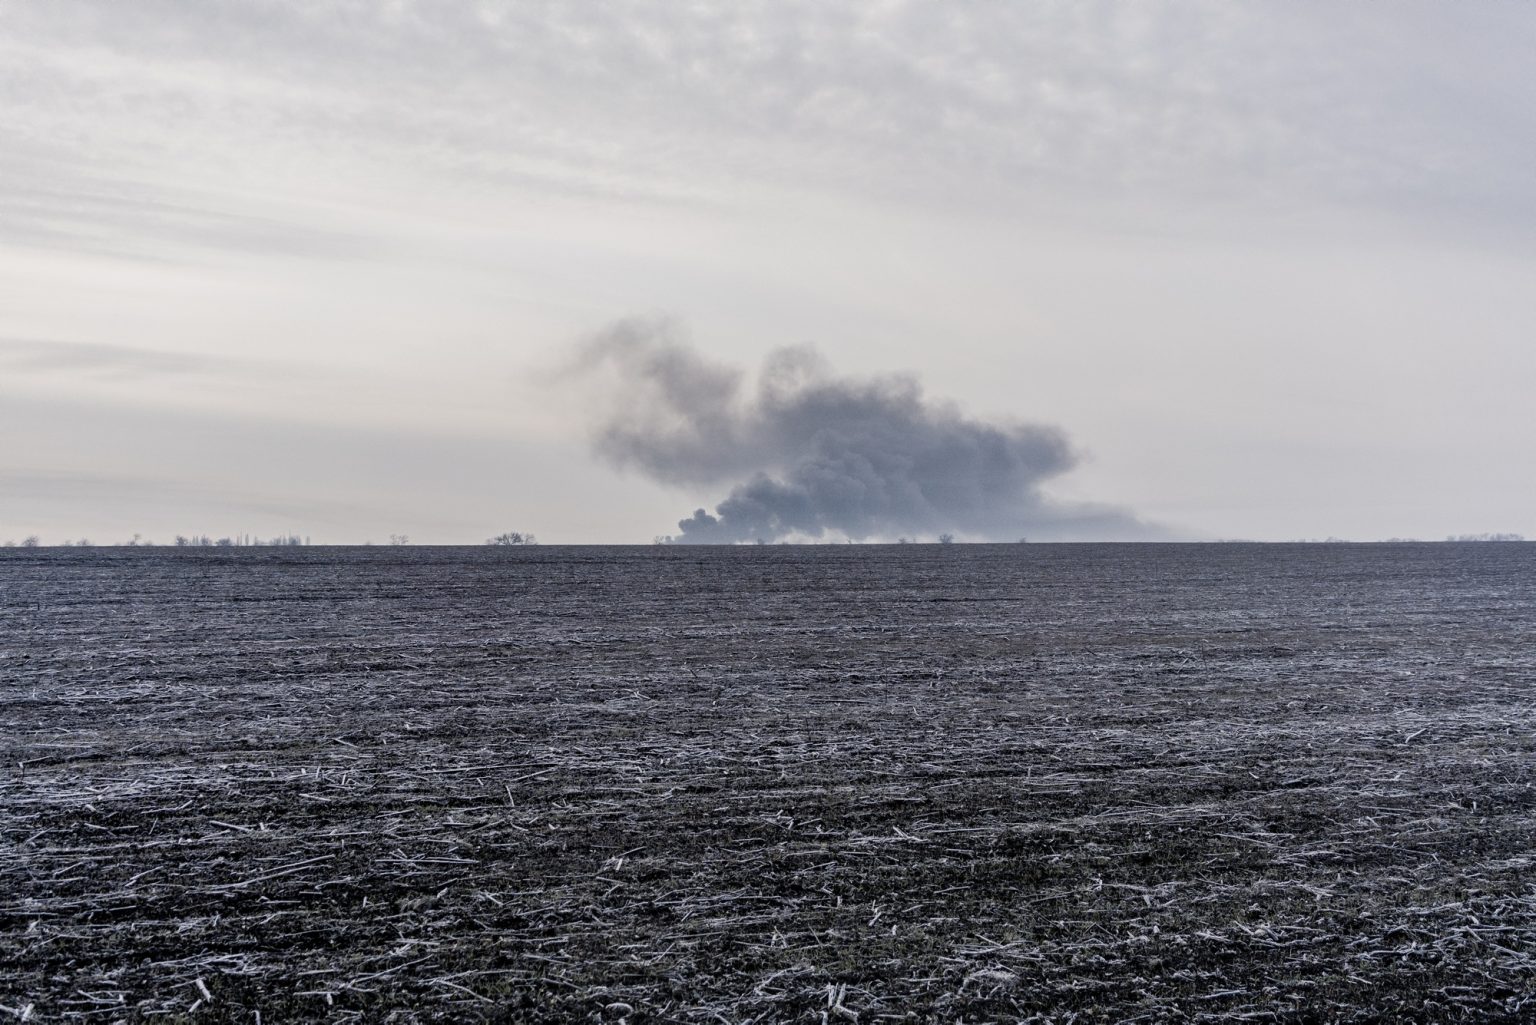 01563824 UKRAINE, Kramatorsk. February 24, 2022 - Smoke rises after explosions have been heard on the outskirts of Kramatorsk.*** SPECIAL   FEE   APPLIES *** *** Local Caption *** 01563824